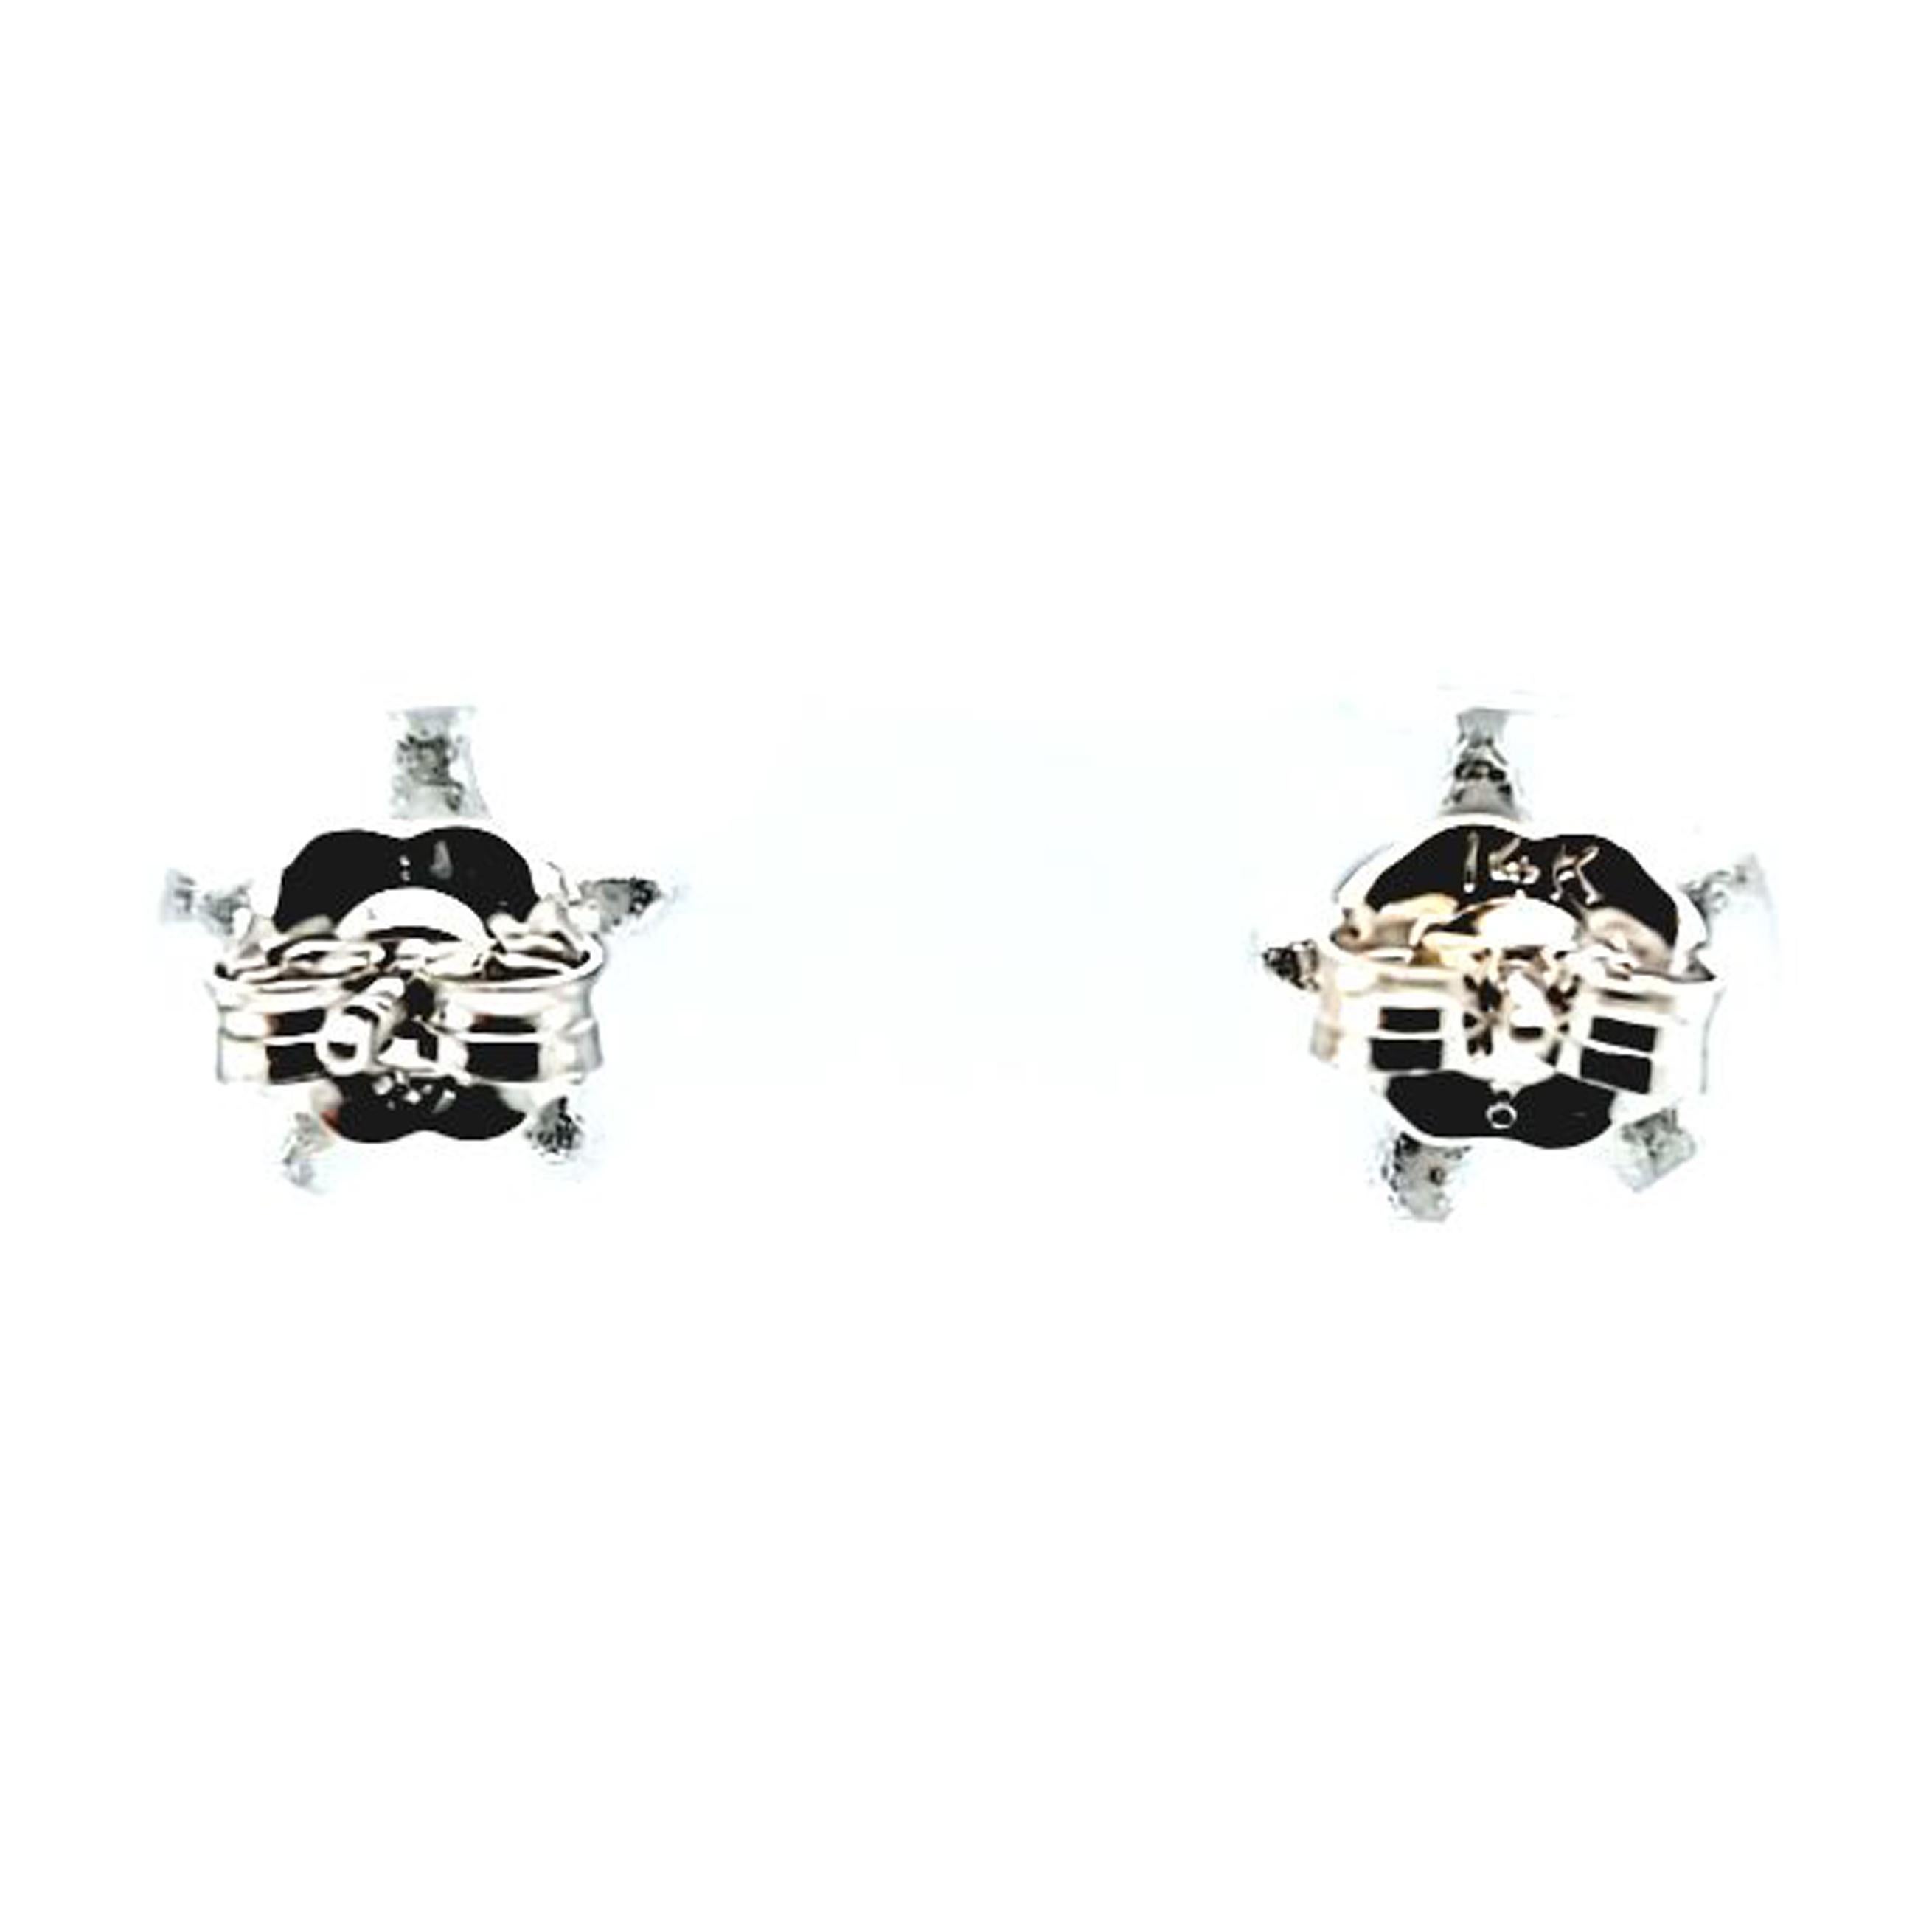 Baguette Diamond Star Stud Earrings In Good Condition For Sale In Coral Gables, FL